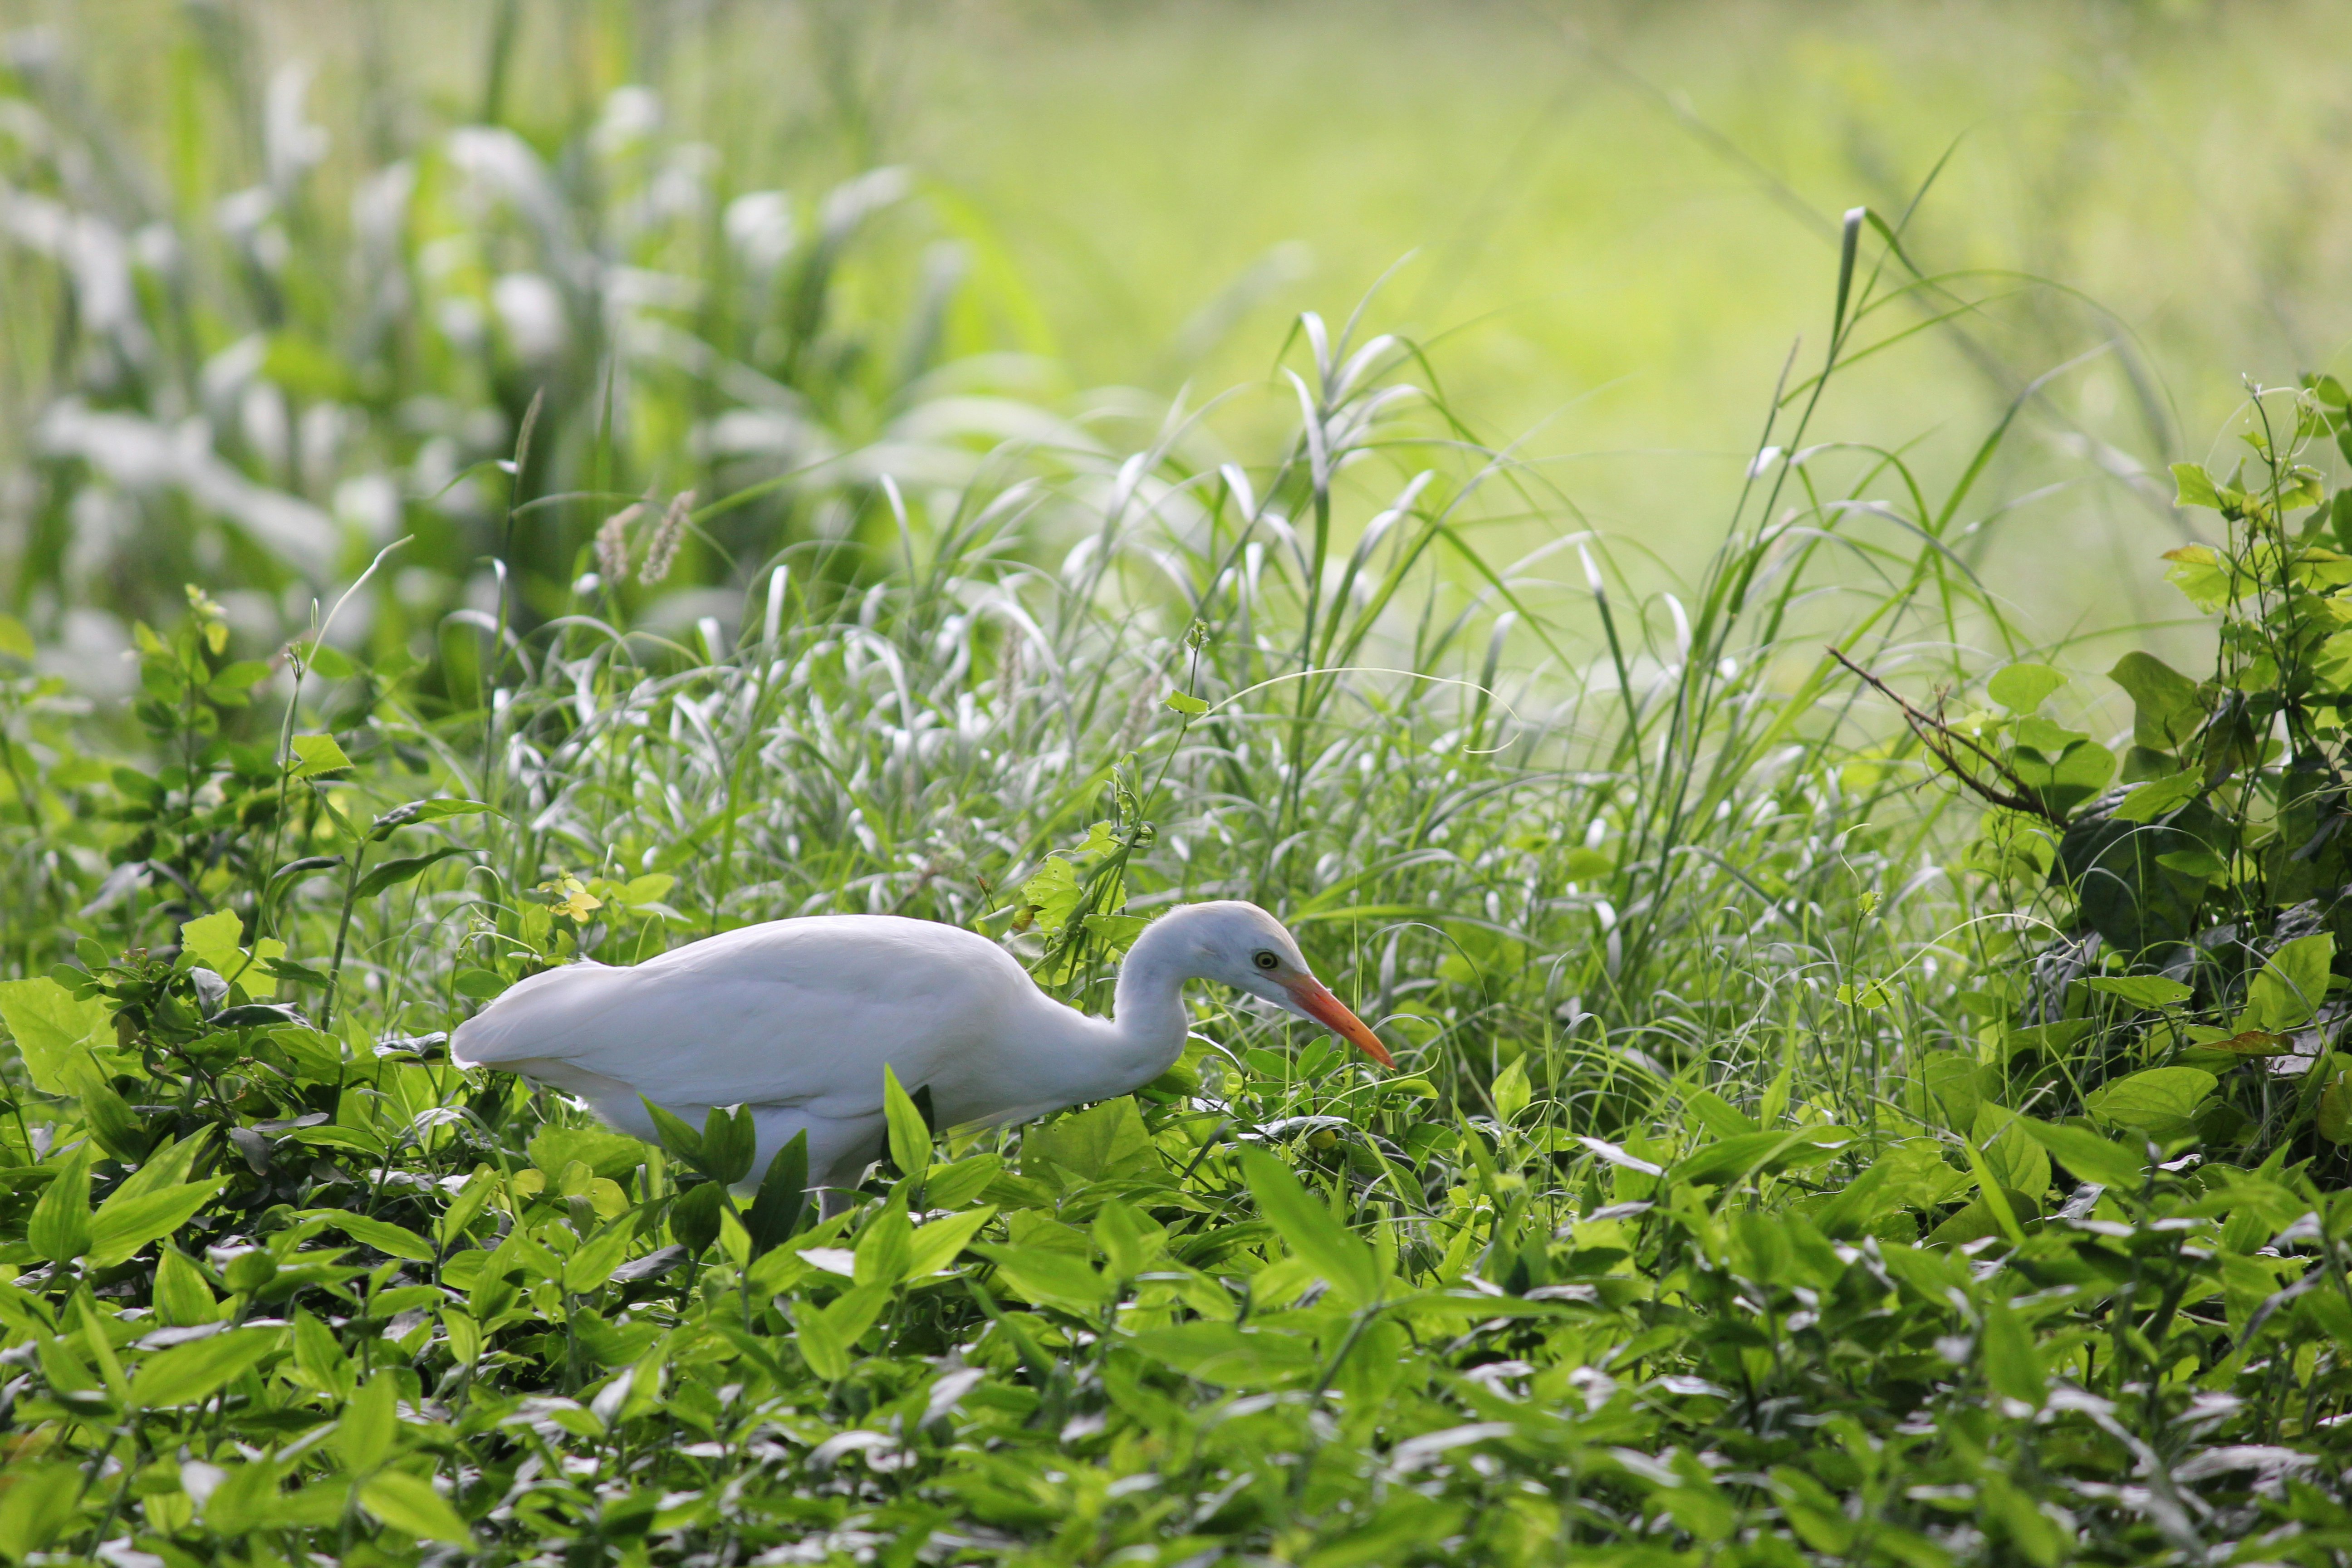 A large white bird hunts for food in tall green grass.